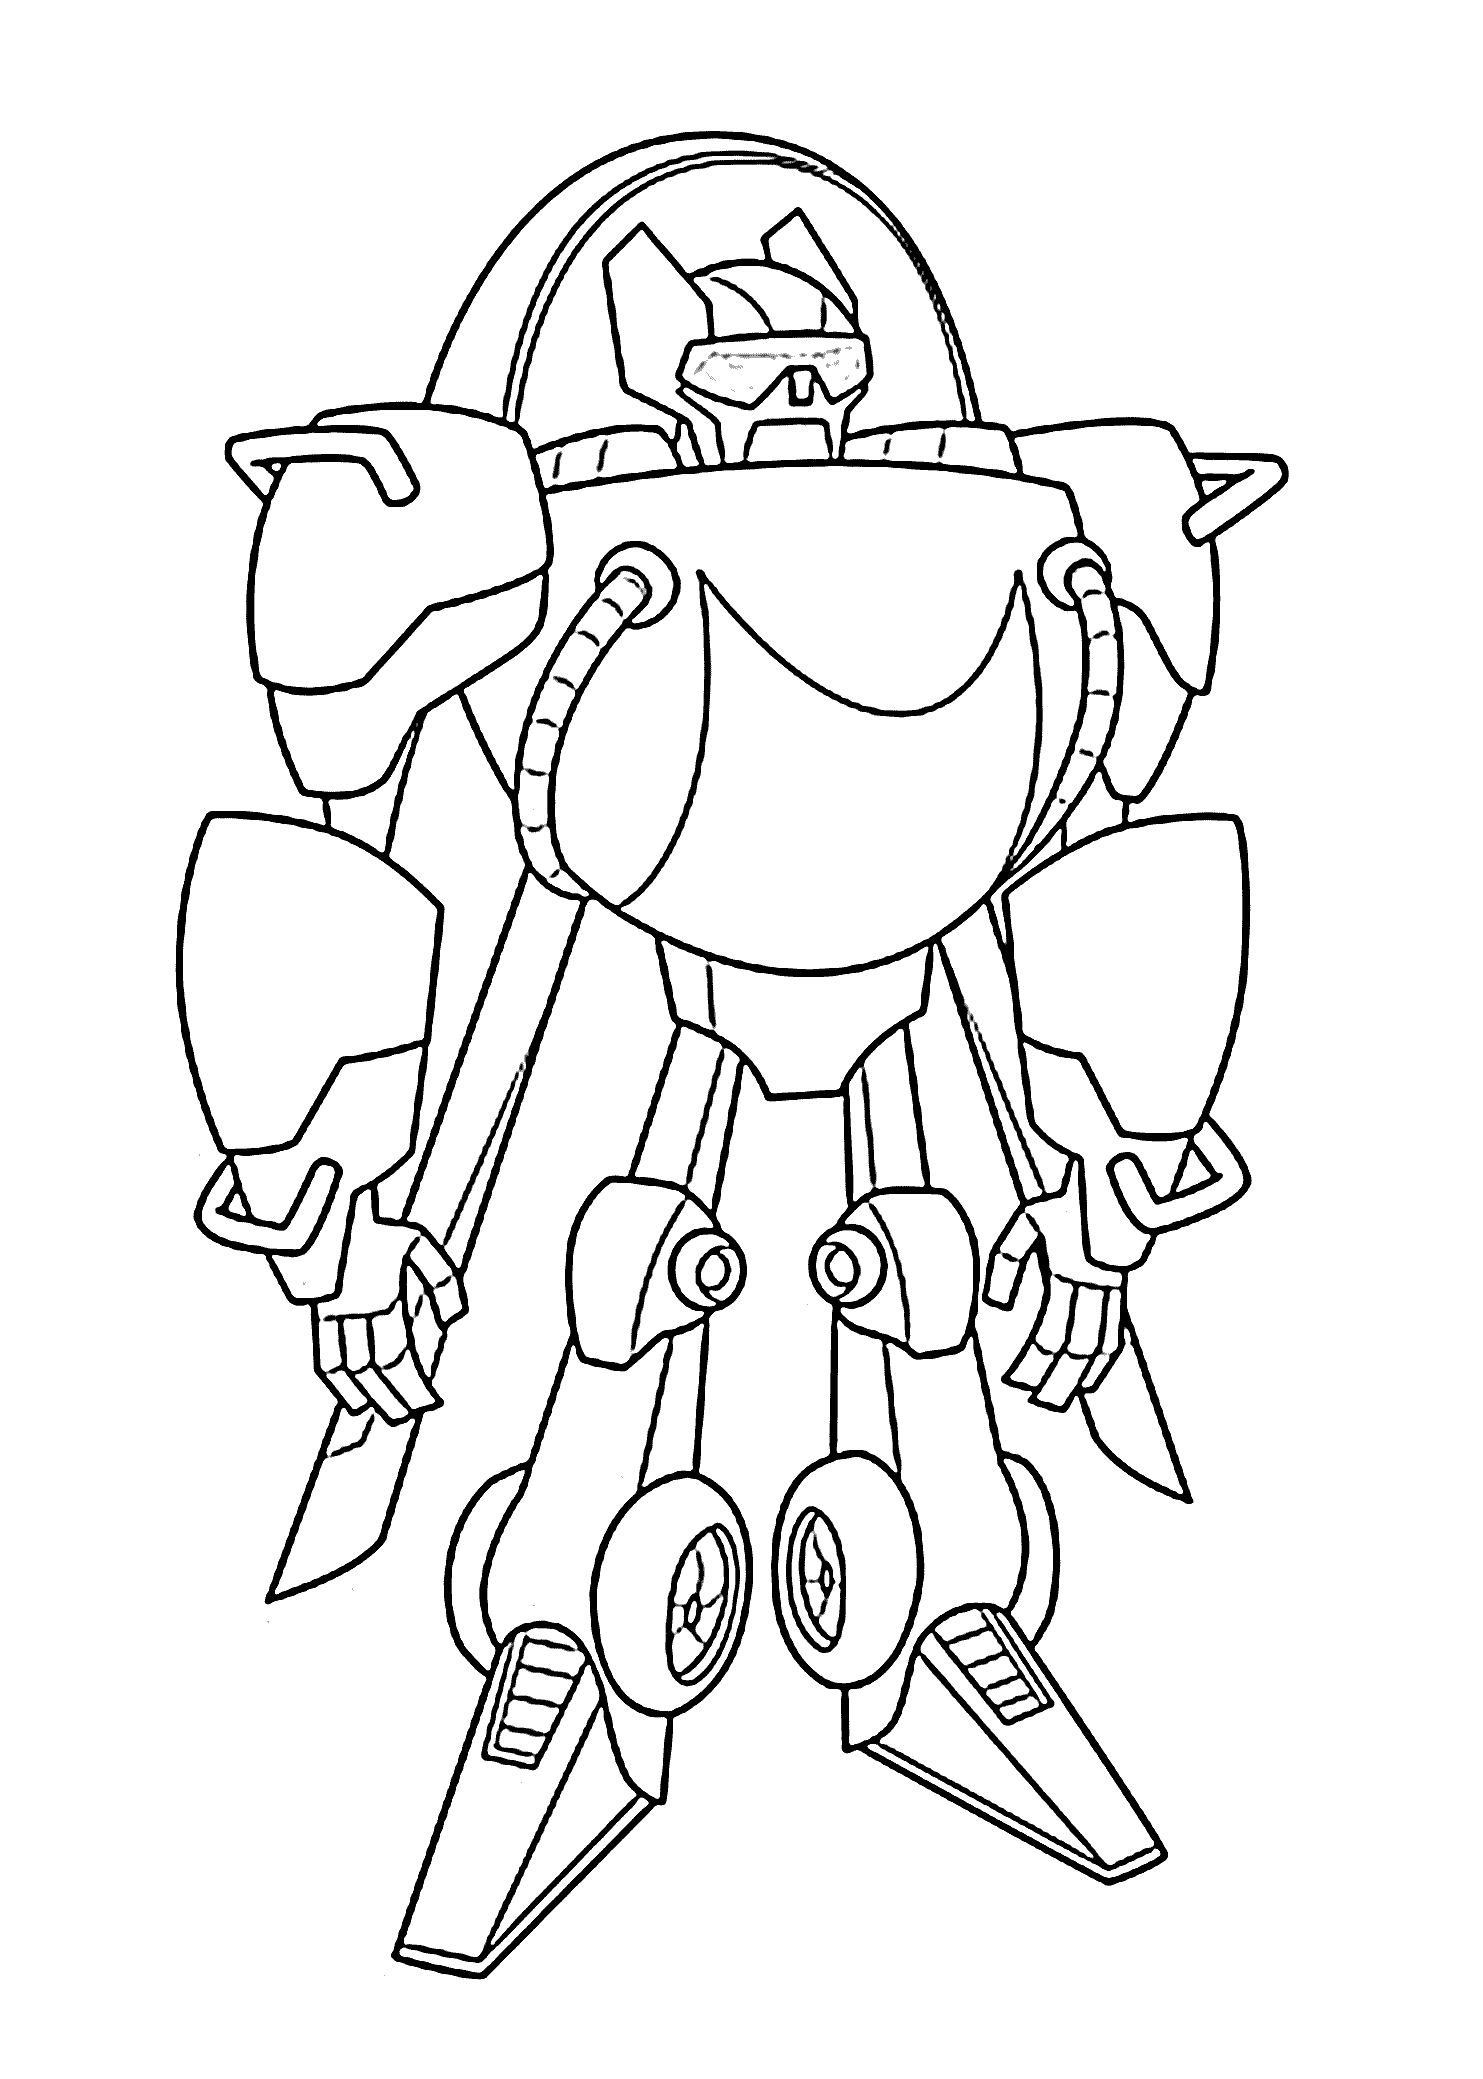 coloring pages : Transformers Rescue Botsoring Page Photo Ideas Pages  Printable Tv Tropes 64 Transformers Rescue Bots Coloring Page Photo Ideas ~  mommaonamissioninc